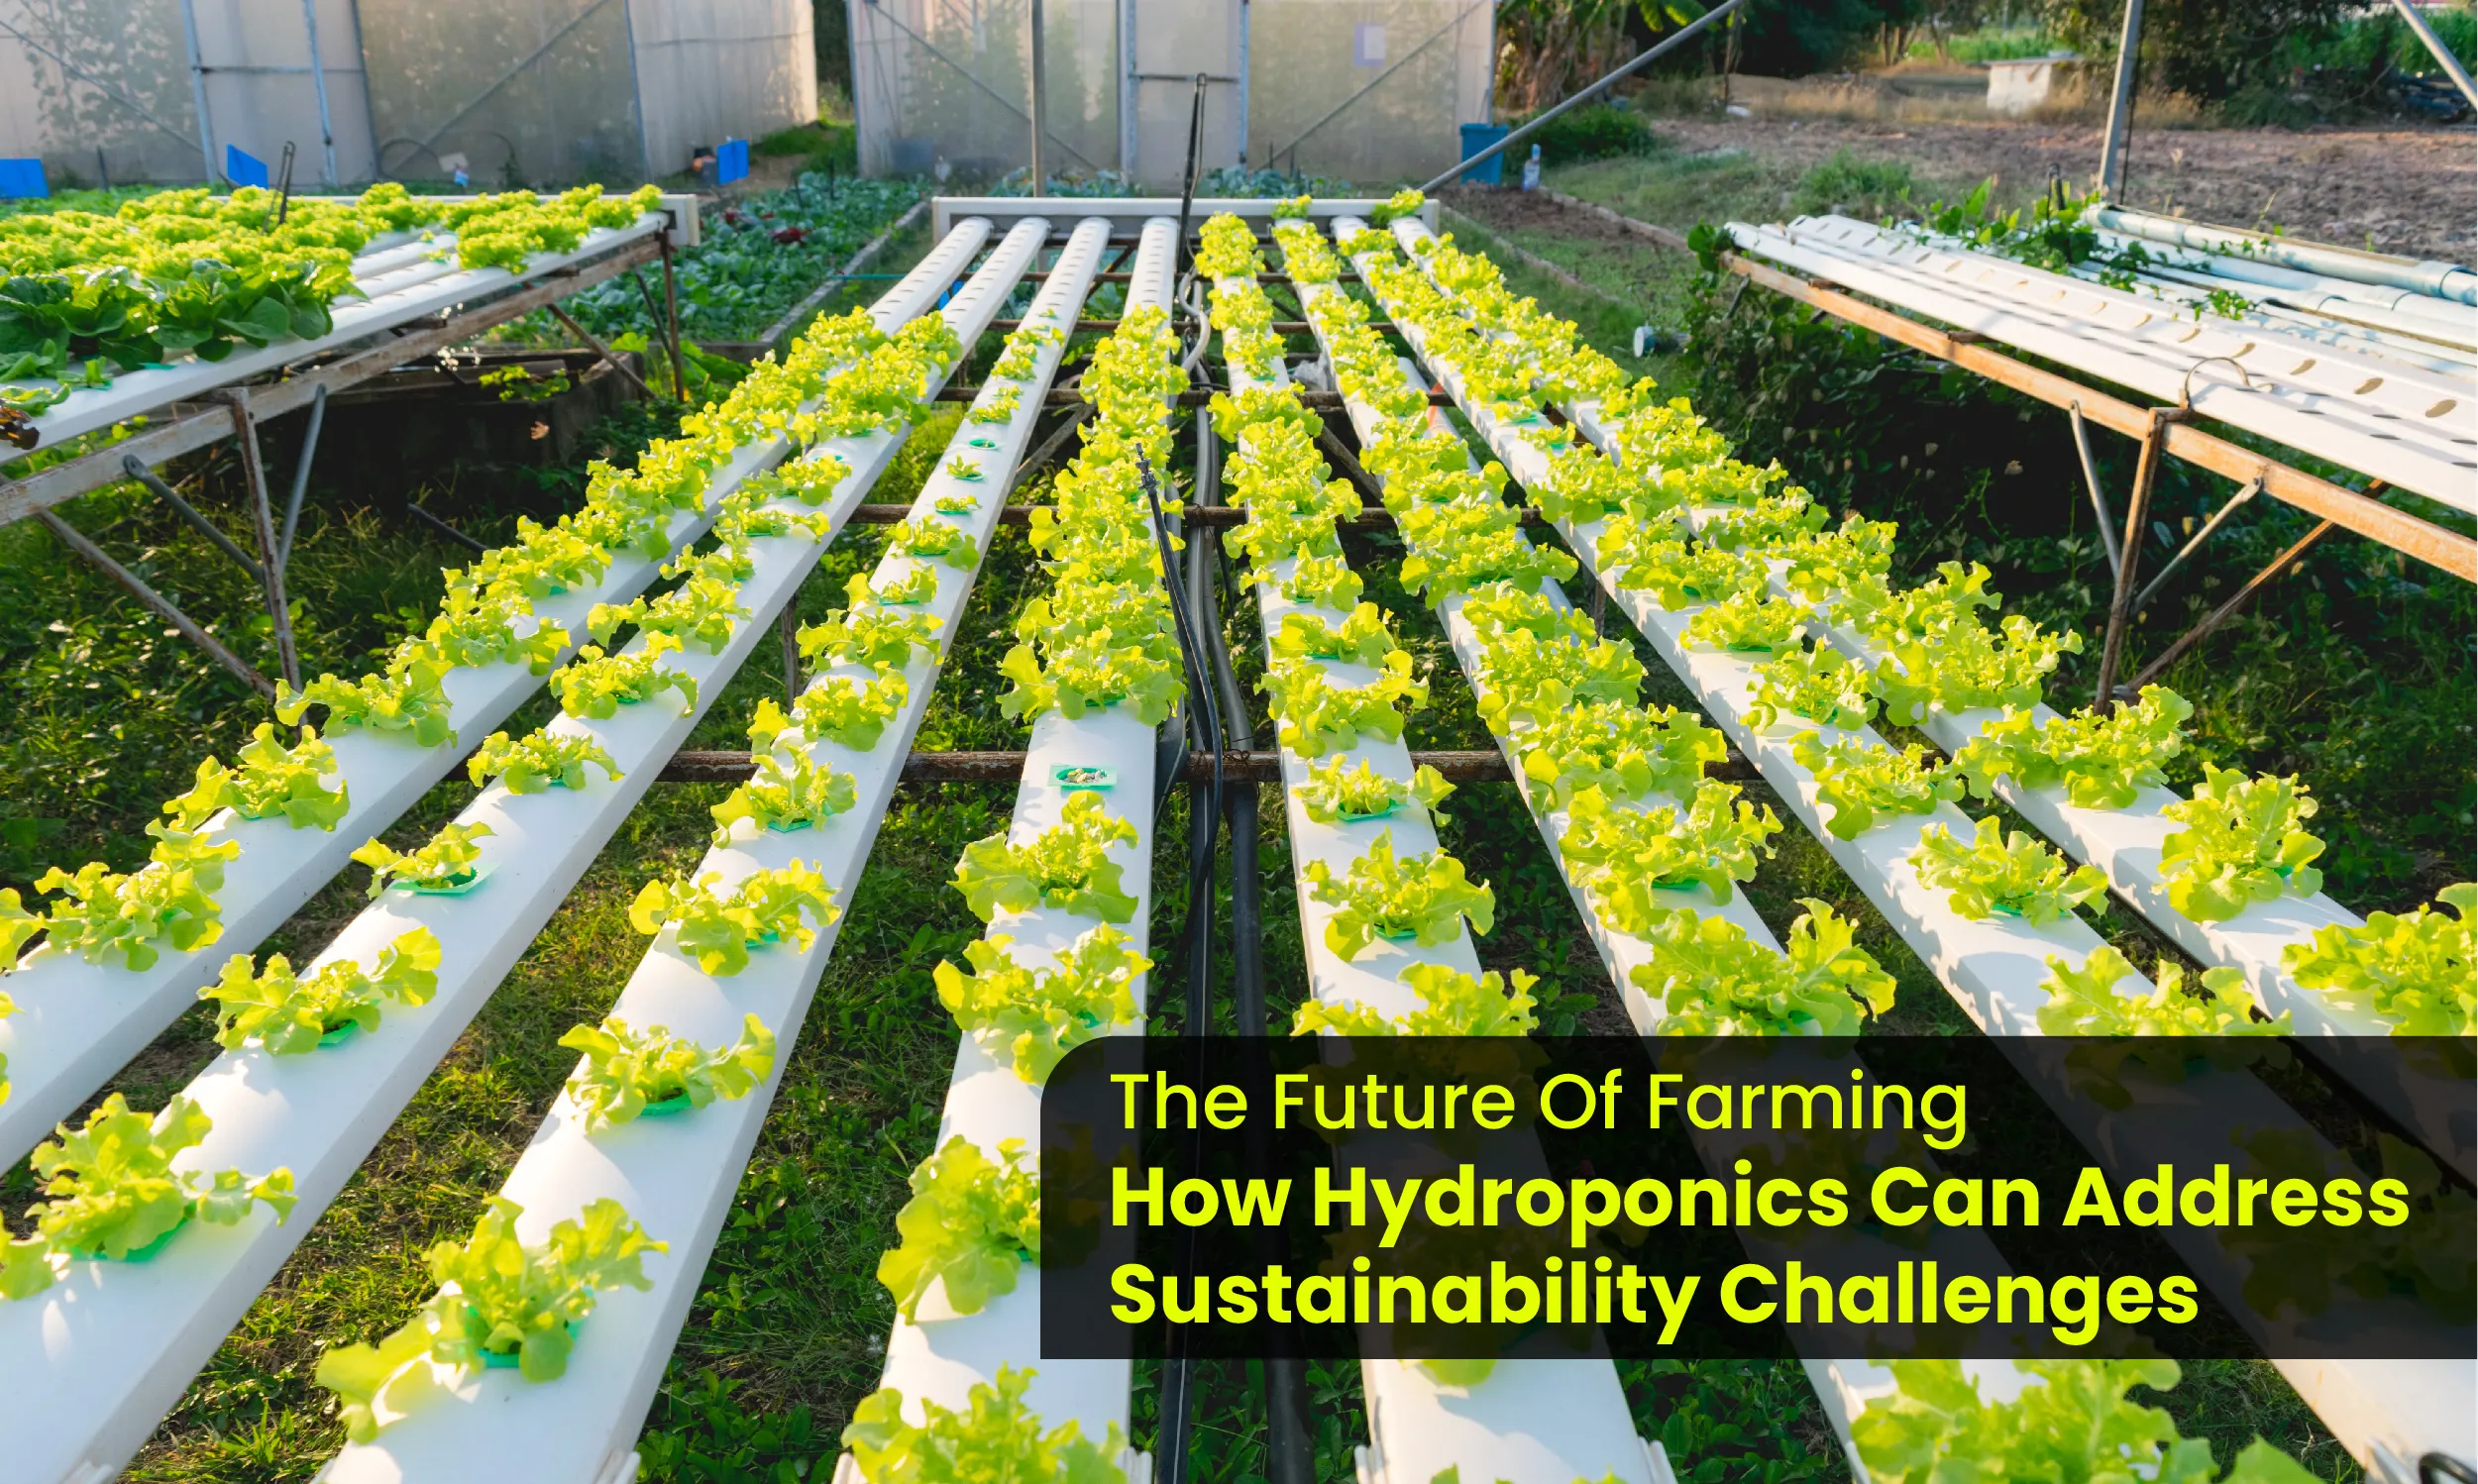 The Future of Farming: How Hydroponics Can Address Sustainability Challenges